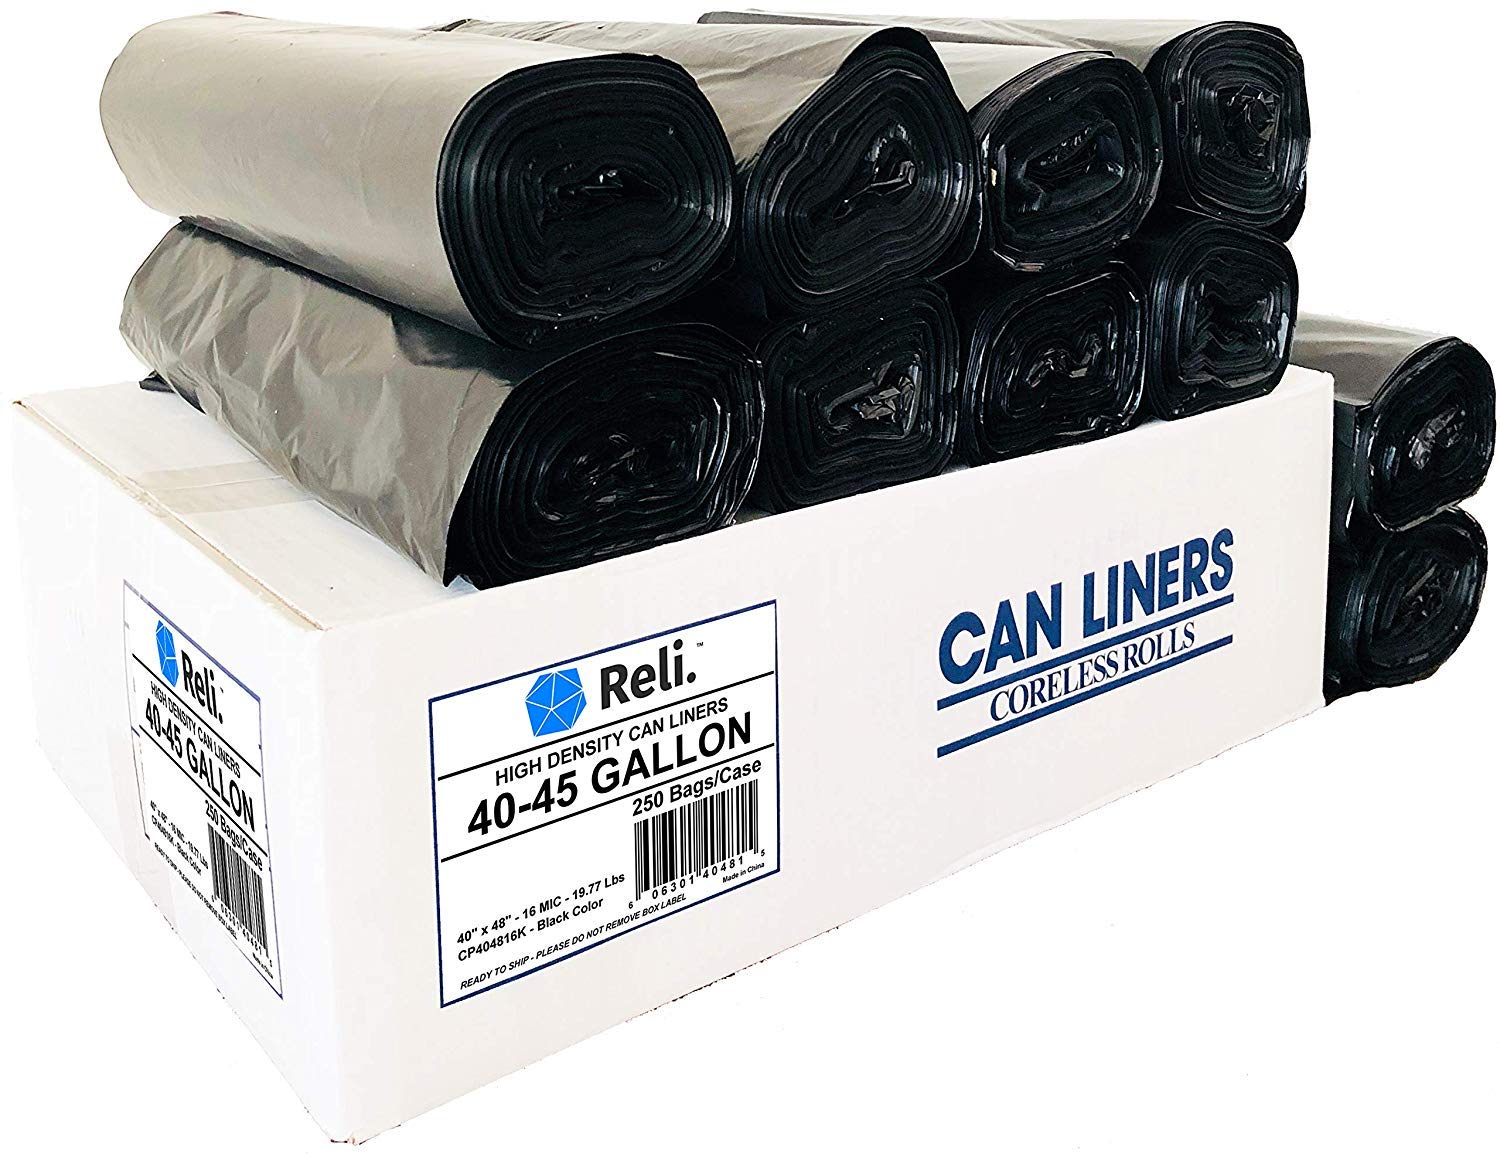 Book Cover Reli. Trash Bags, 40-45 Gallon (250 Count Wholesale) - Star Seal High Density Rolls (Black) - Can Liners, Garbage Bags with 40 Gallon (40 Gal) to 45 Gallon (45 Gal) Capacity